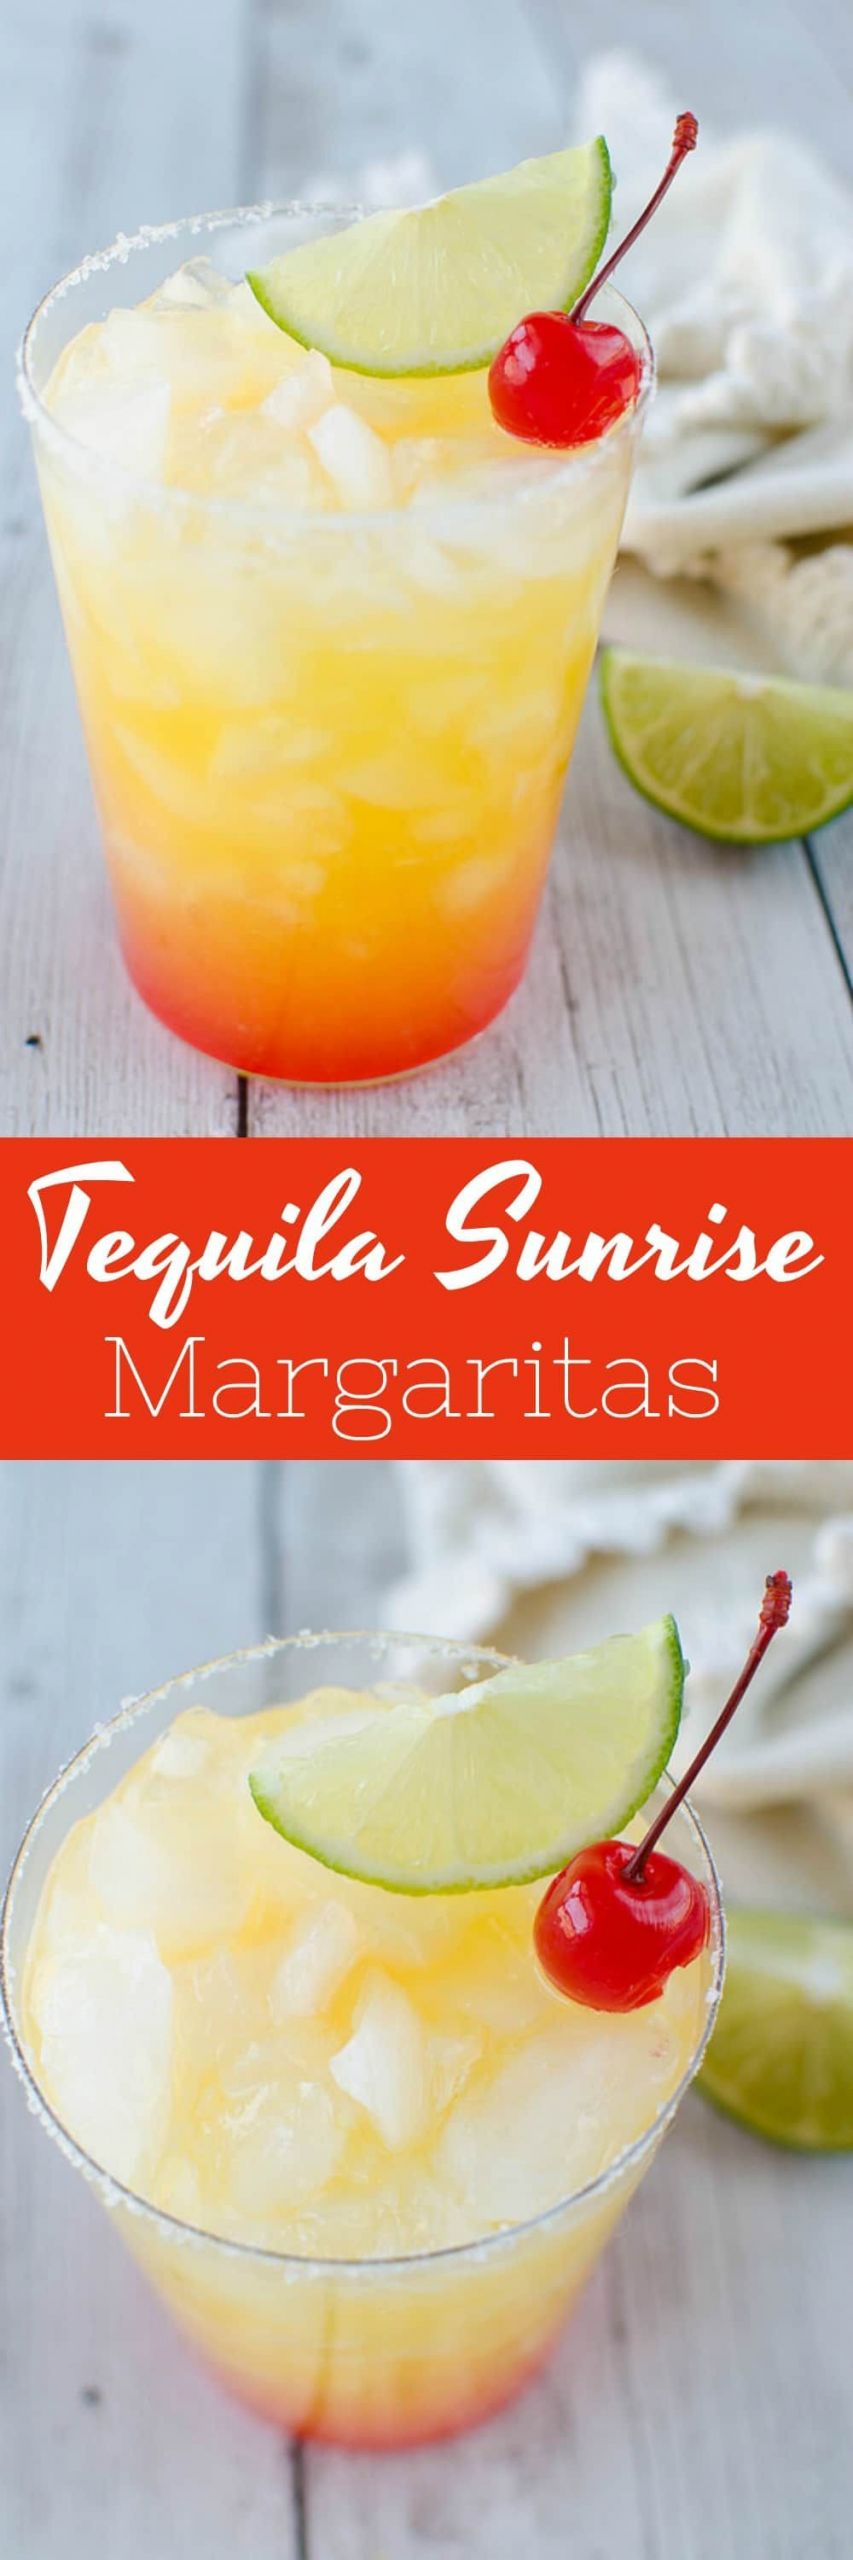 Summer Tequila Drinks
 Skinny Tequila Sunrise Margaritas a low calorie